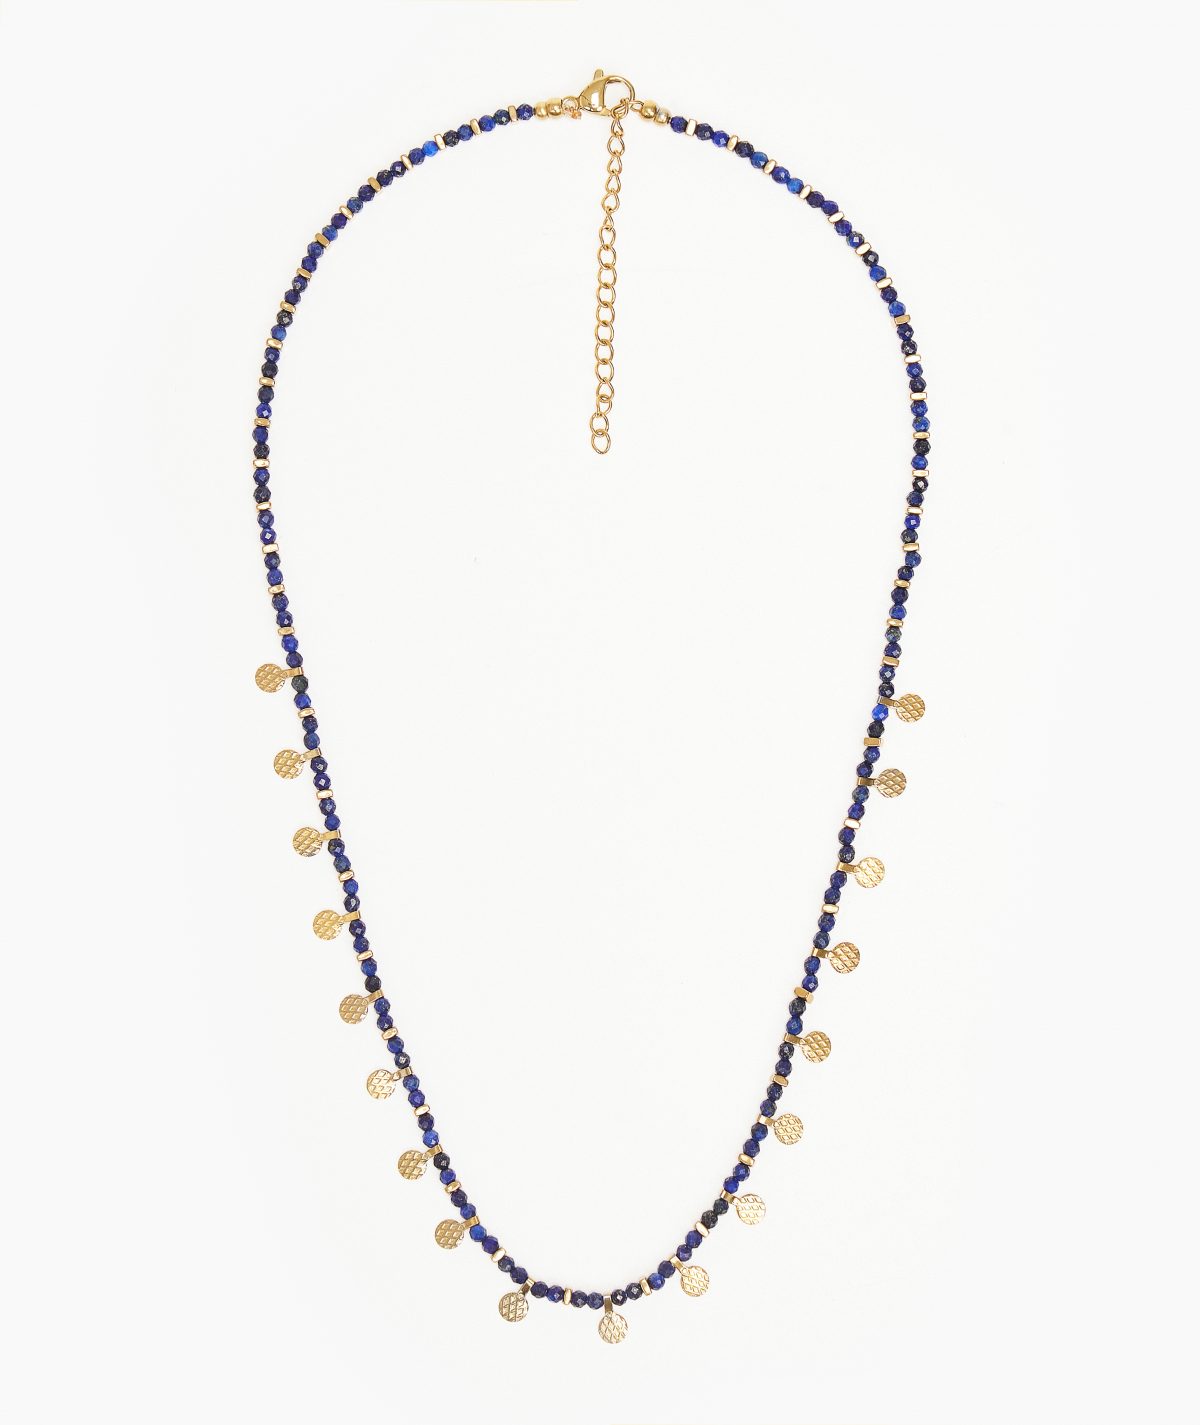 Blue Necklace with Gold Coins by TFD